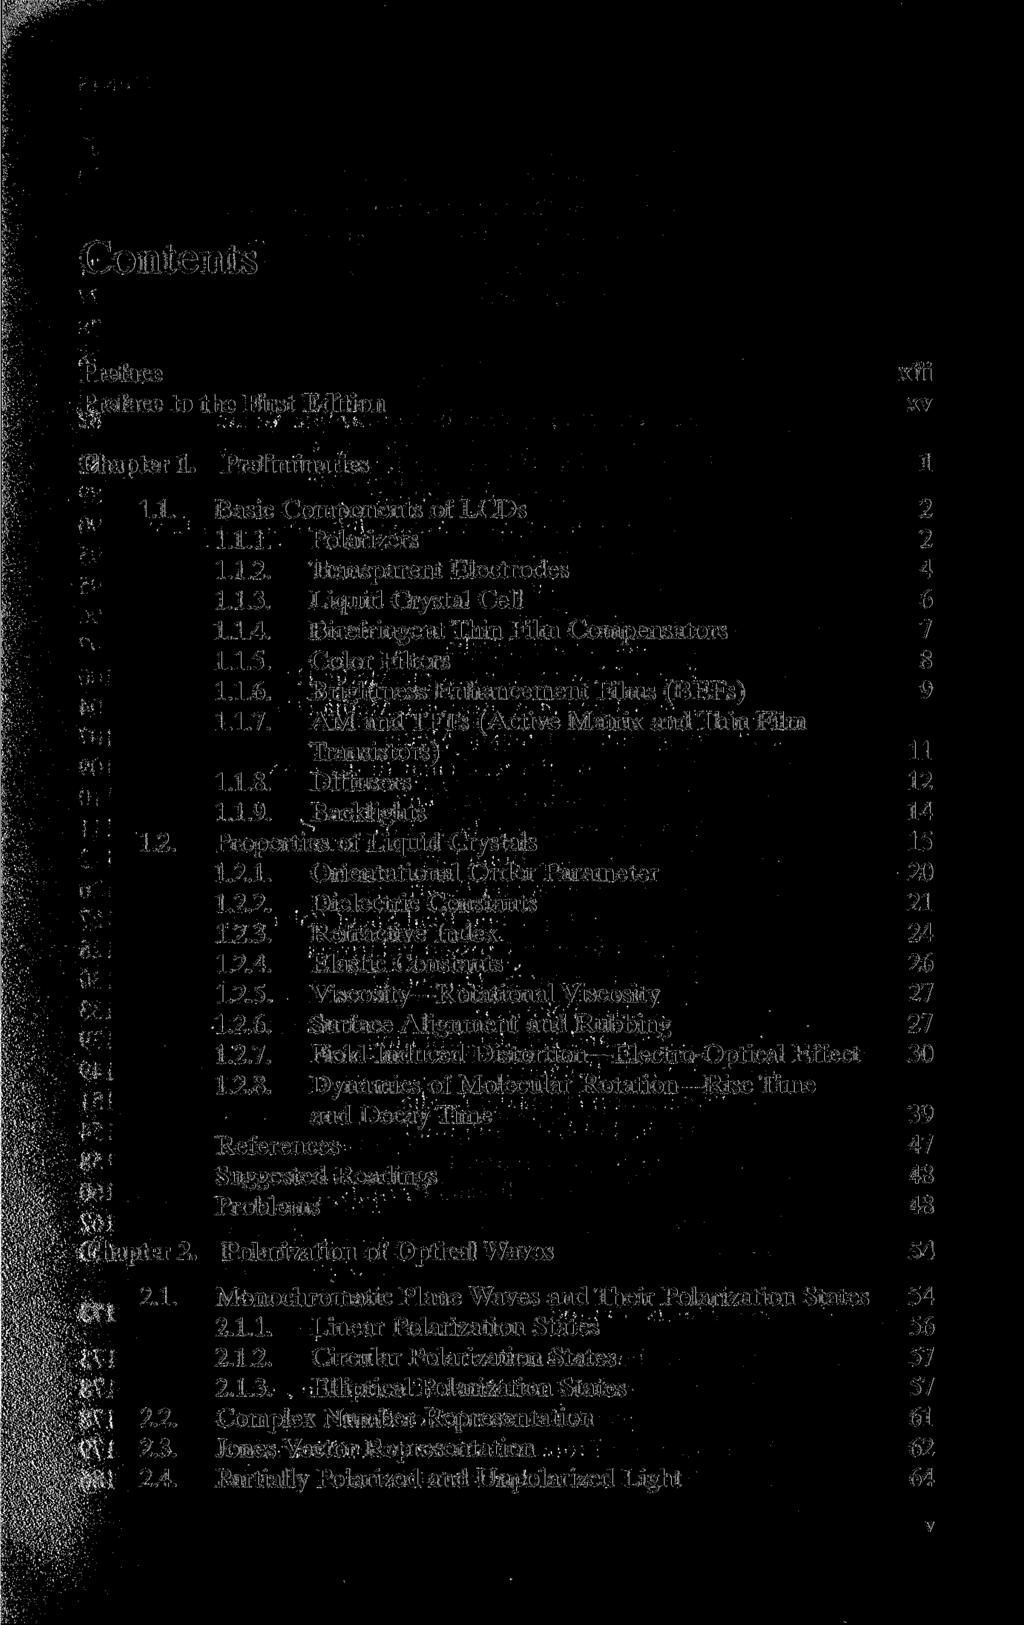 Contents Preface Preface to the First Edition xiii xv Chapter 1. Preliminaries 1 1.1. Basic Components of LCDs 2 1.1.1. Polarizers 2 1.1.2. Transparent Electrodes 4 